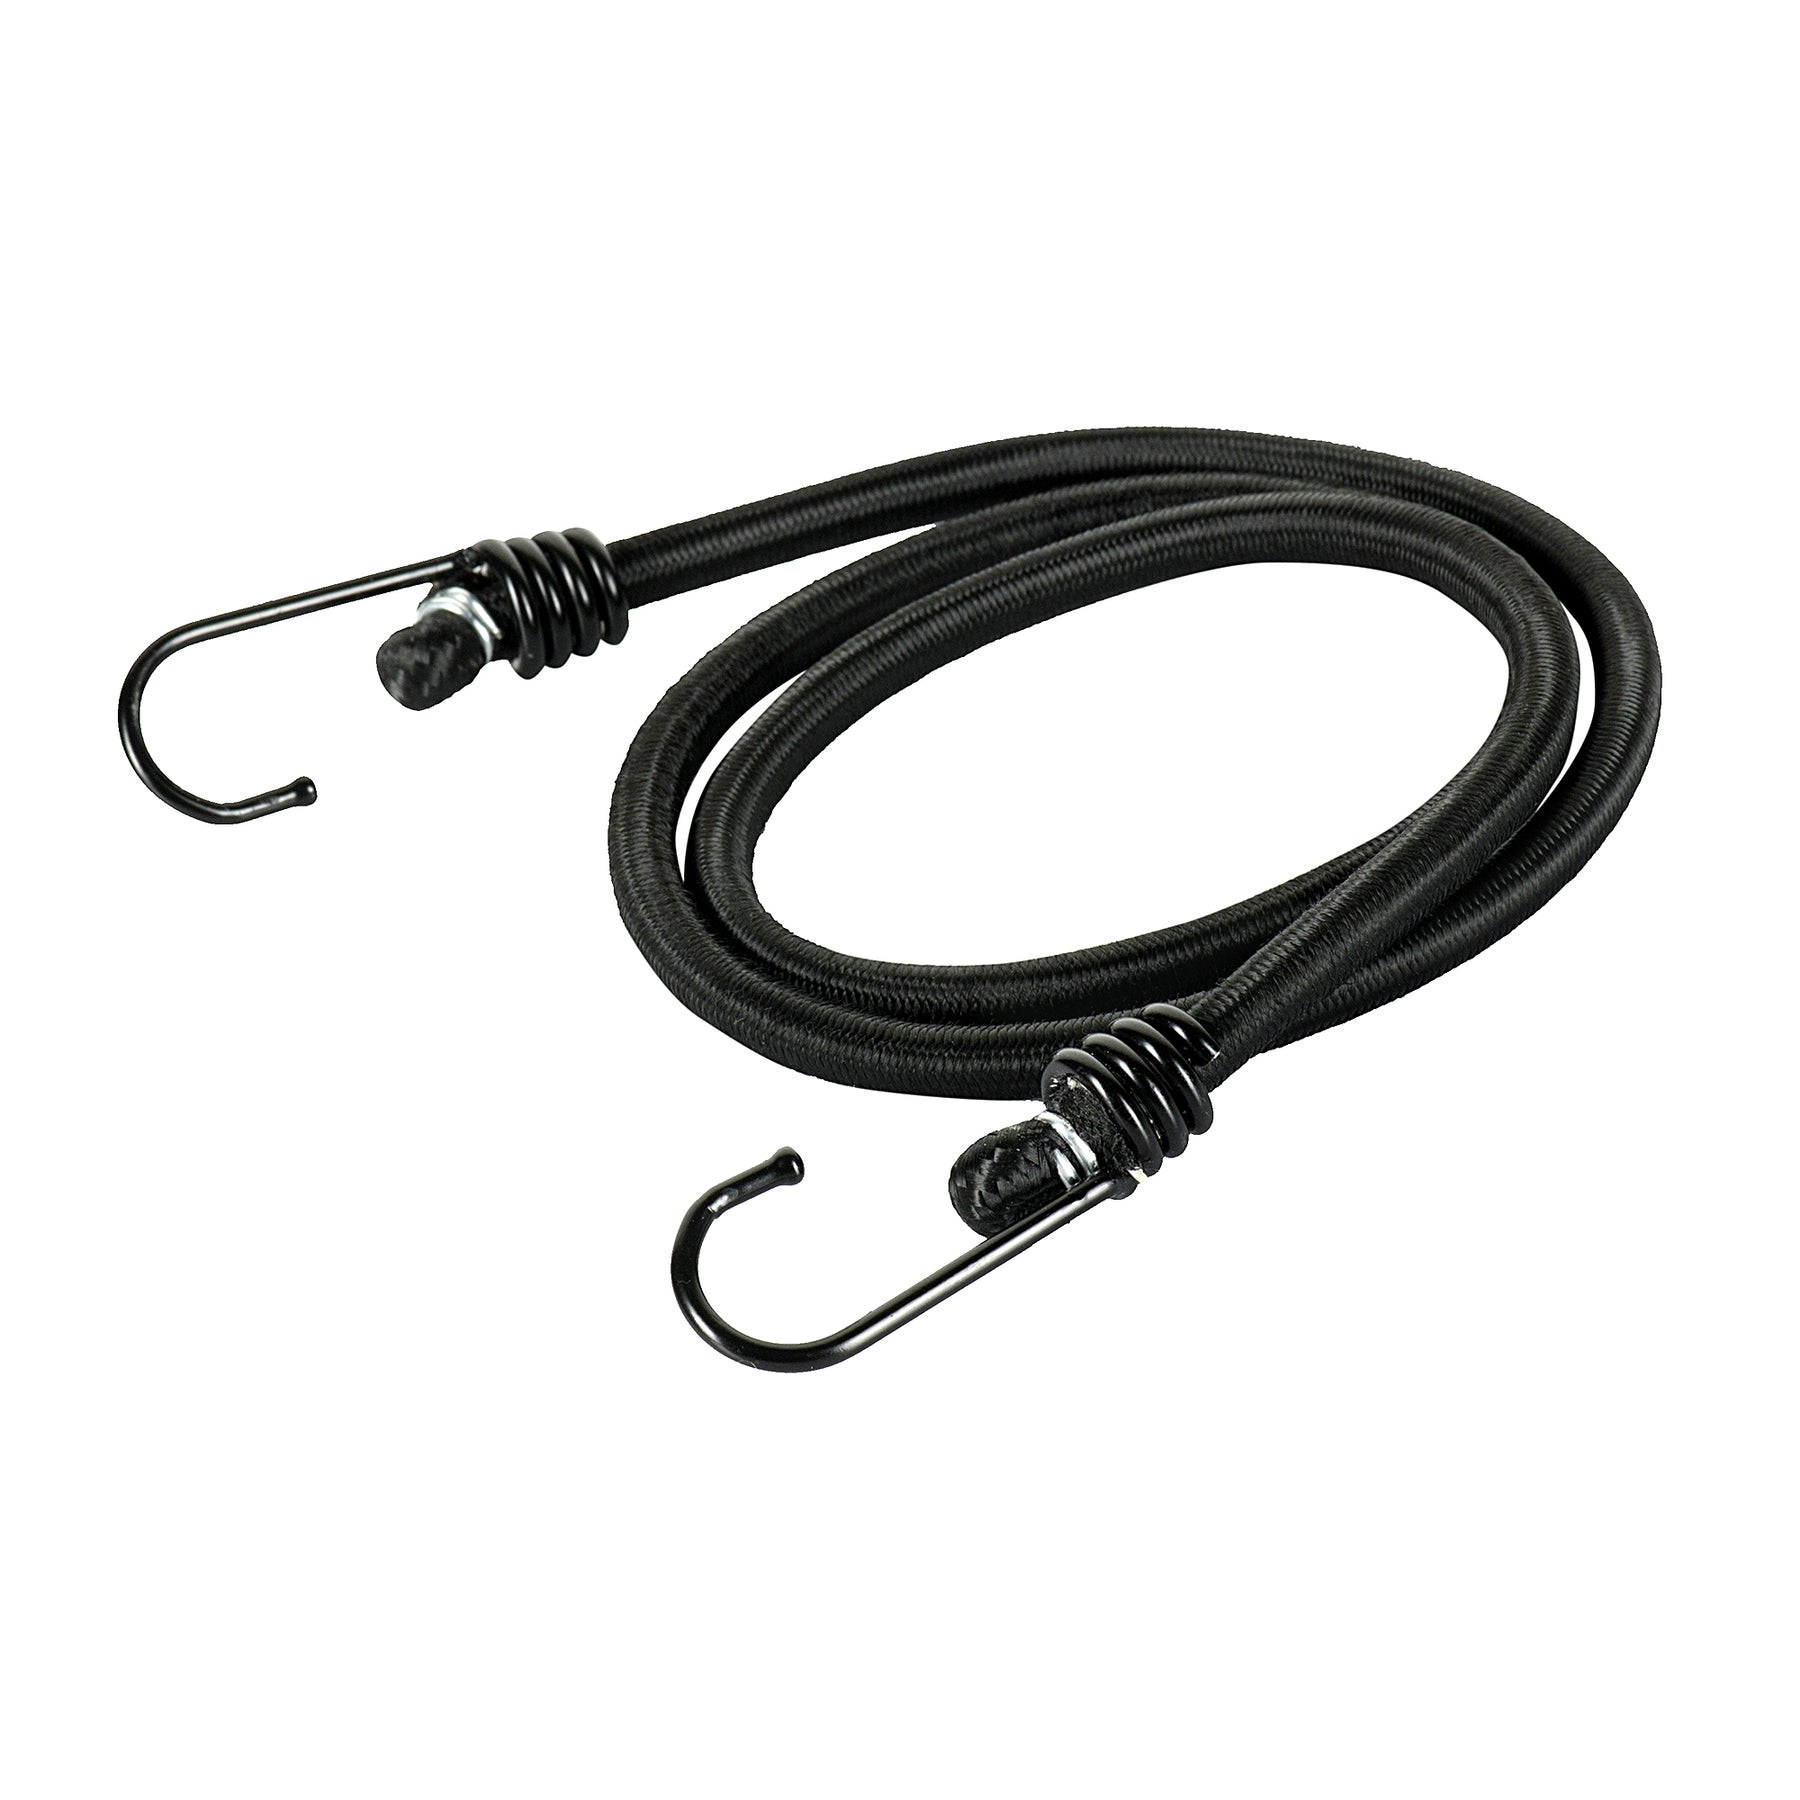 M-Tac 40 Bungee Cord with Metal Hooks (Set of 2) – M-TAC